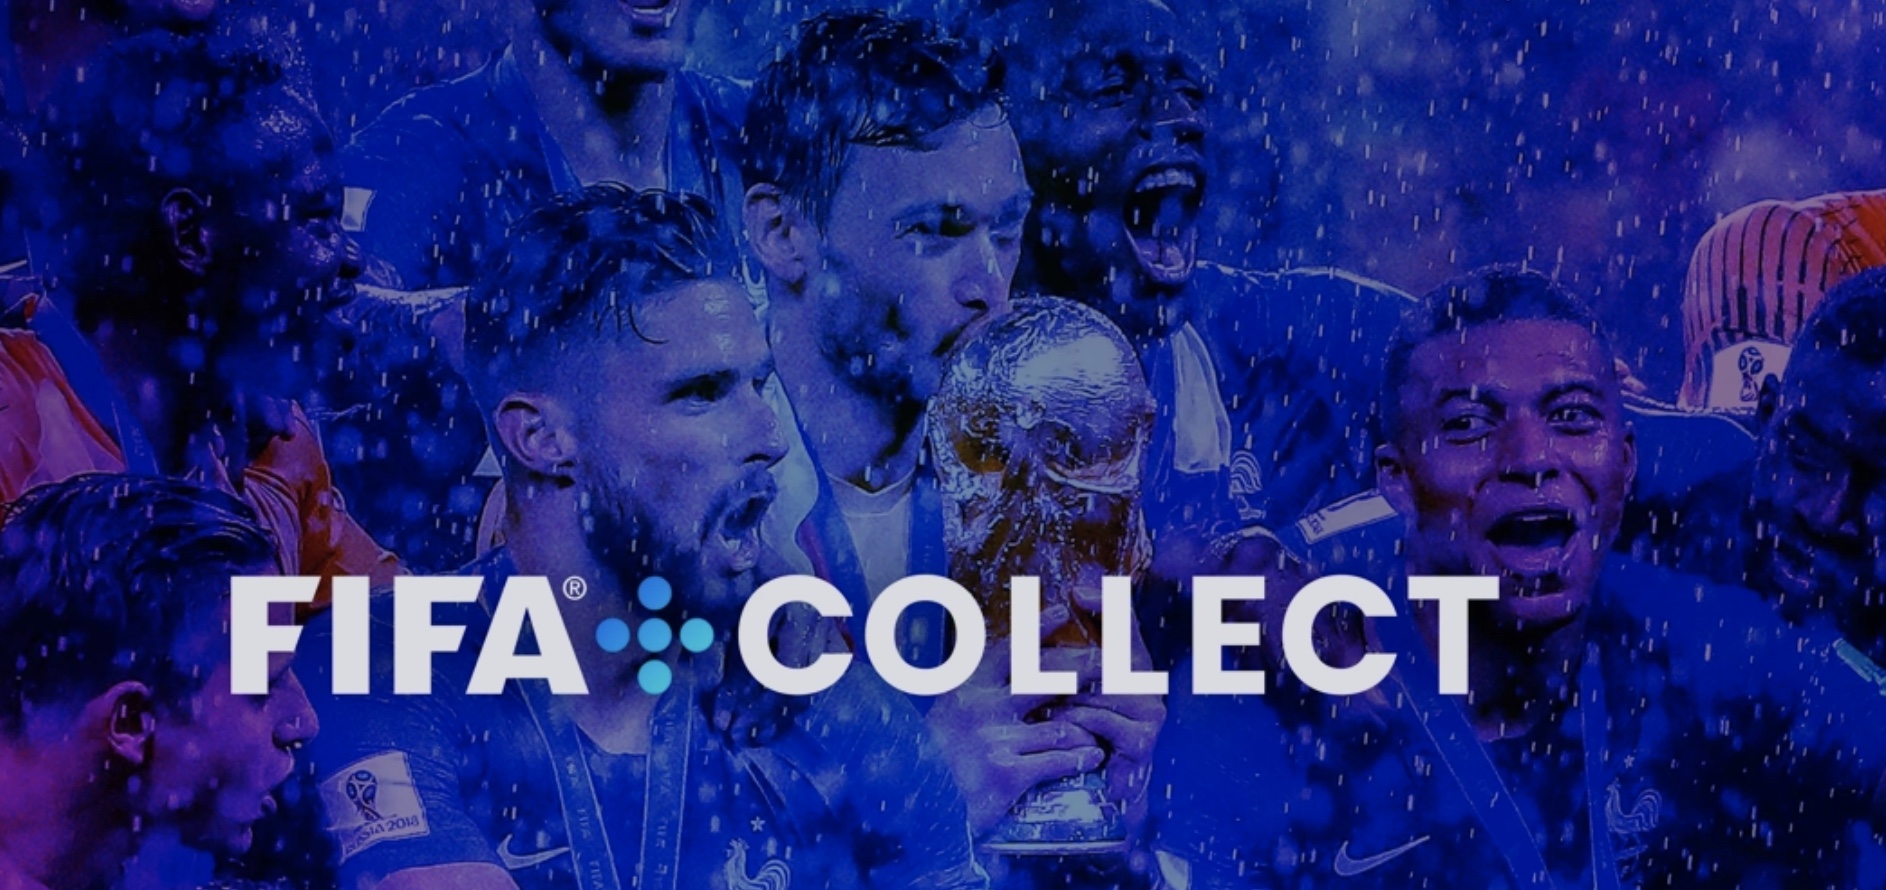 FIFA Introduces NFT Collection For 2023 Club World Cup